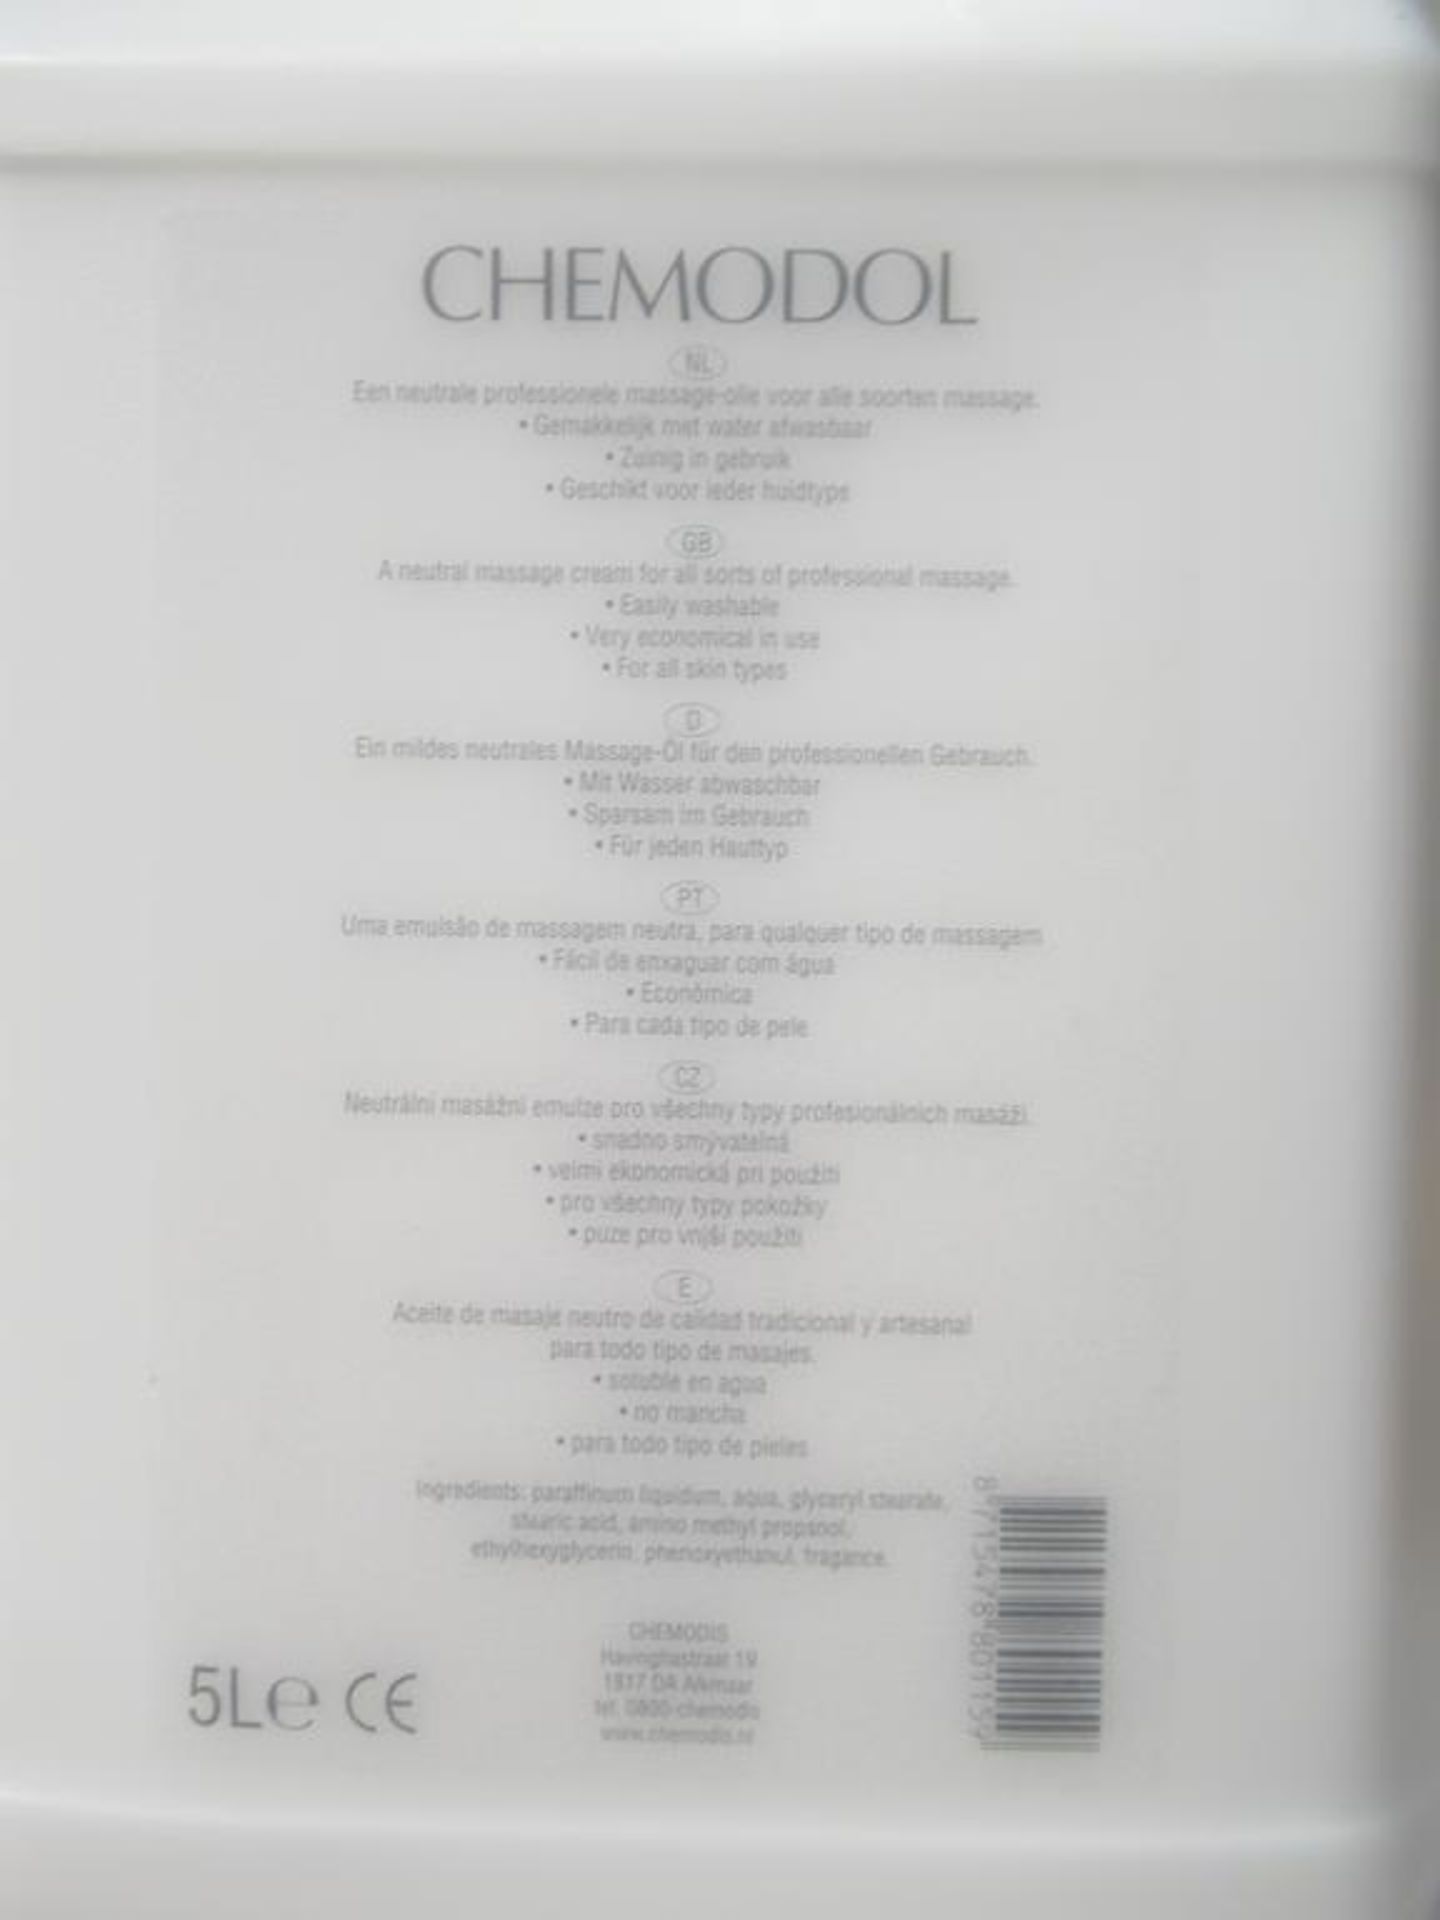 5 x boxes 4 per box of Chemodis Chemodol 5 litre Massage Oil "for all skin types" - Image 4 of 4